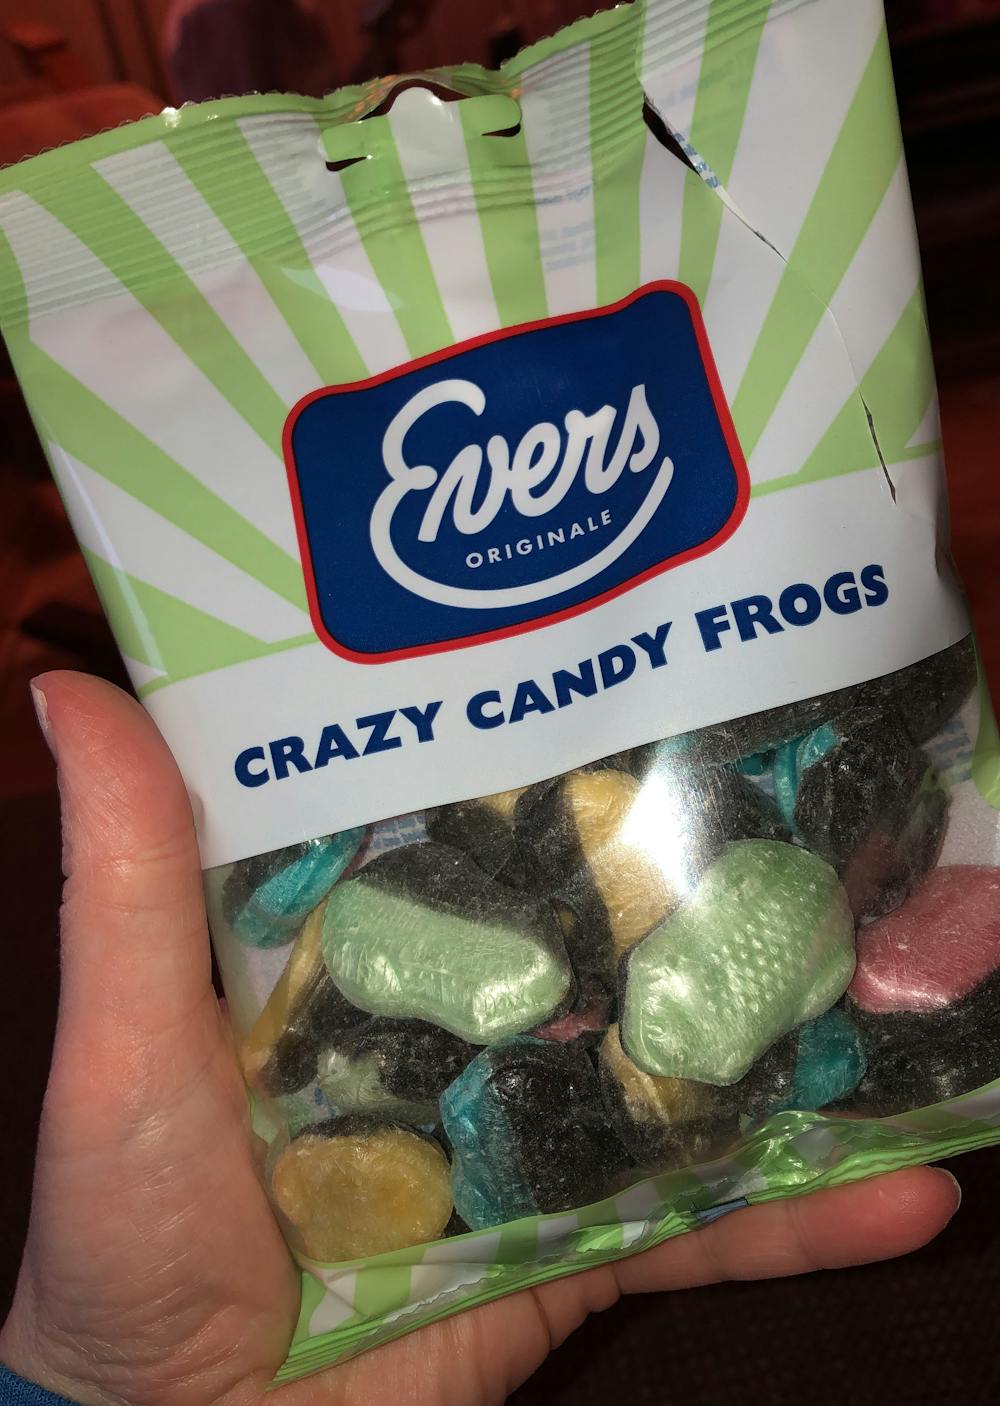 Crazy candy frogs, Evens